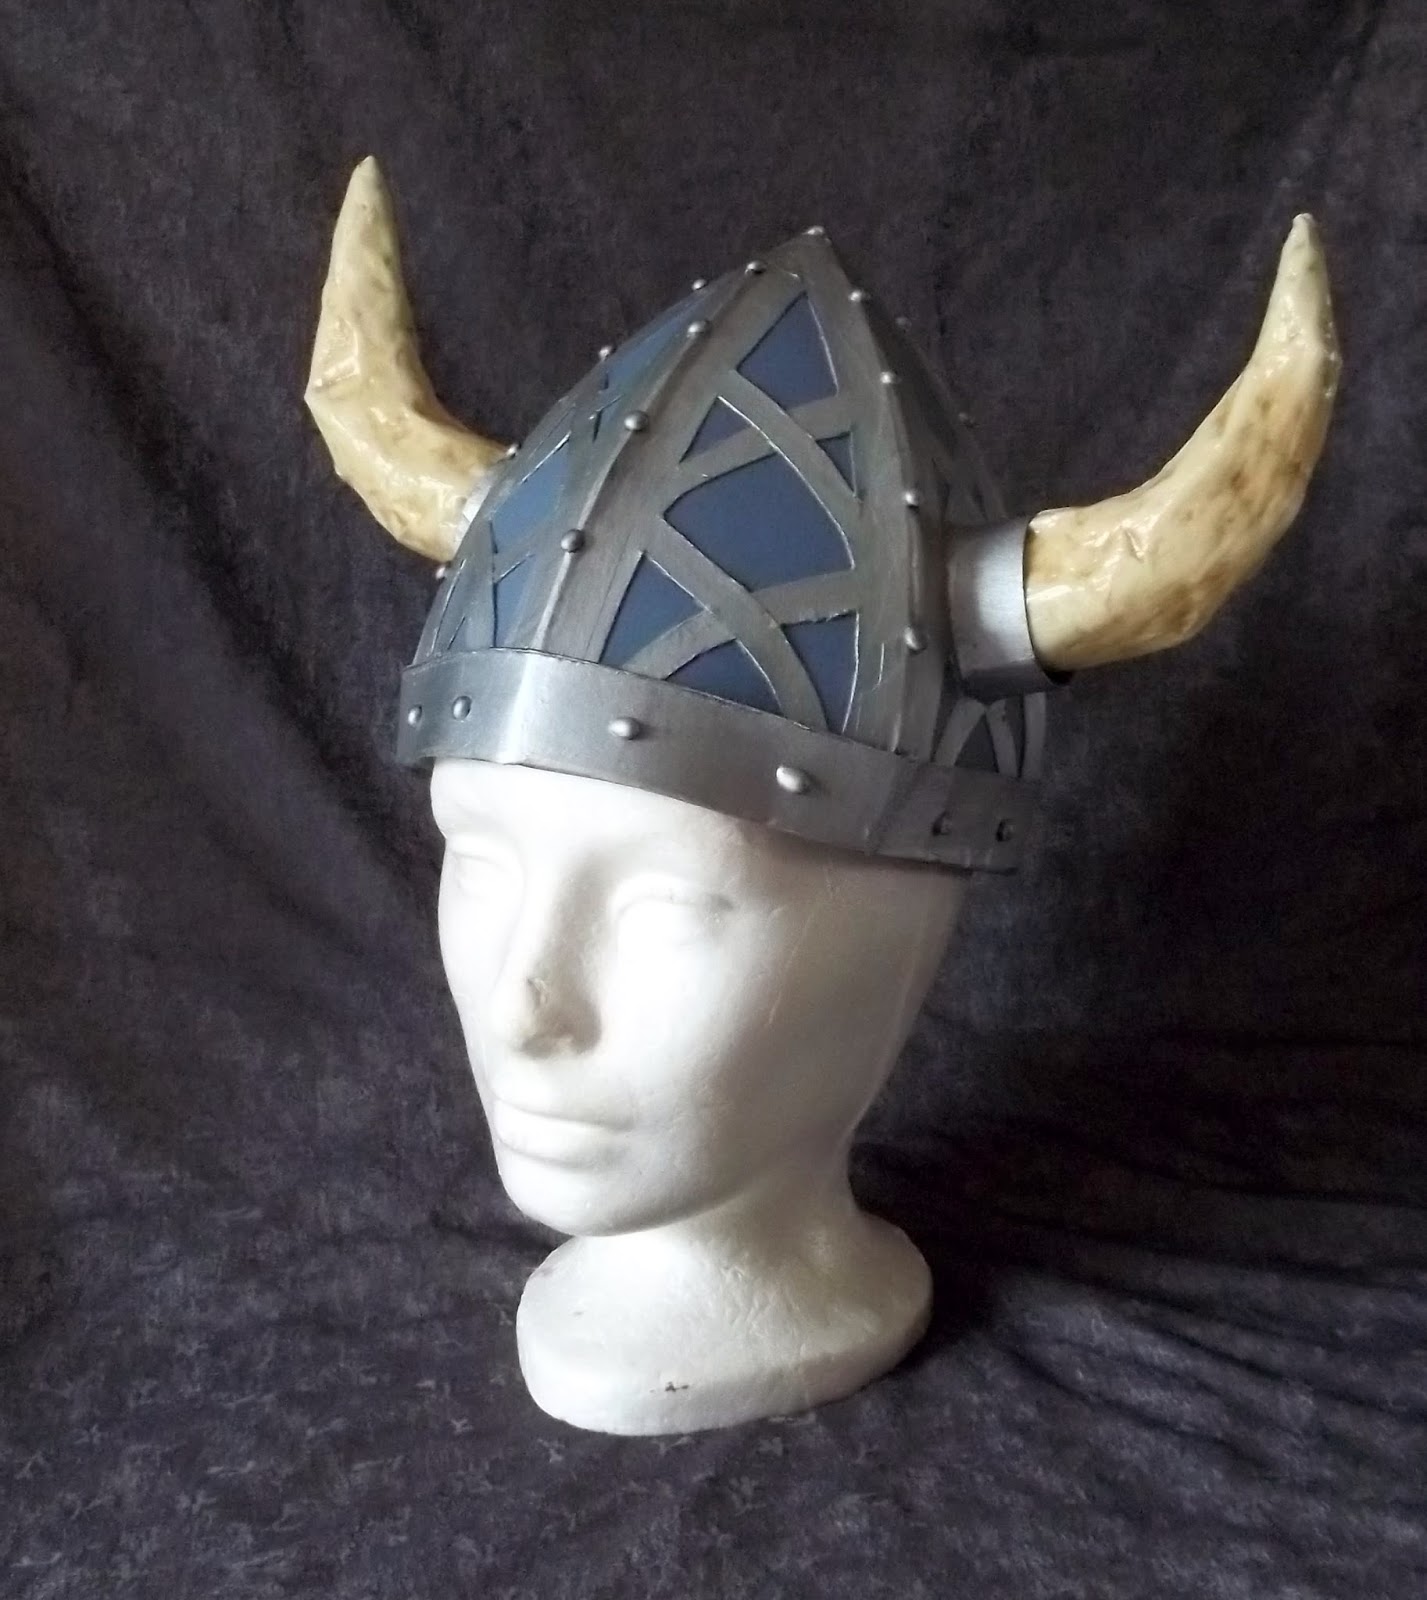 All Things Crafty: Viking Inspired Helmets in Paper Mache